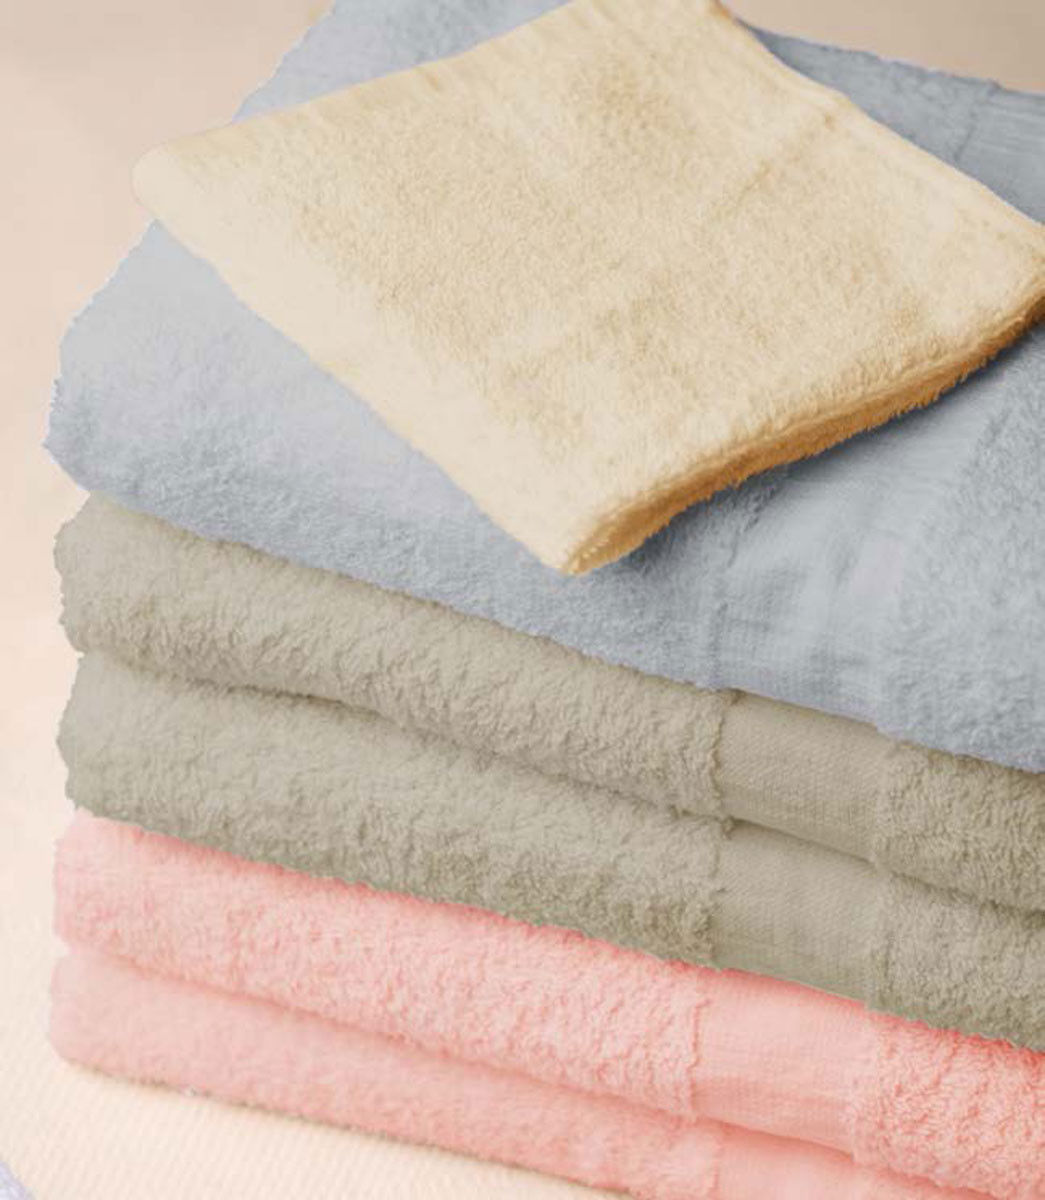 Can I feel the softness of these American cotton towels before buying?